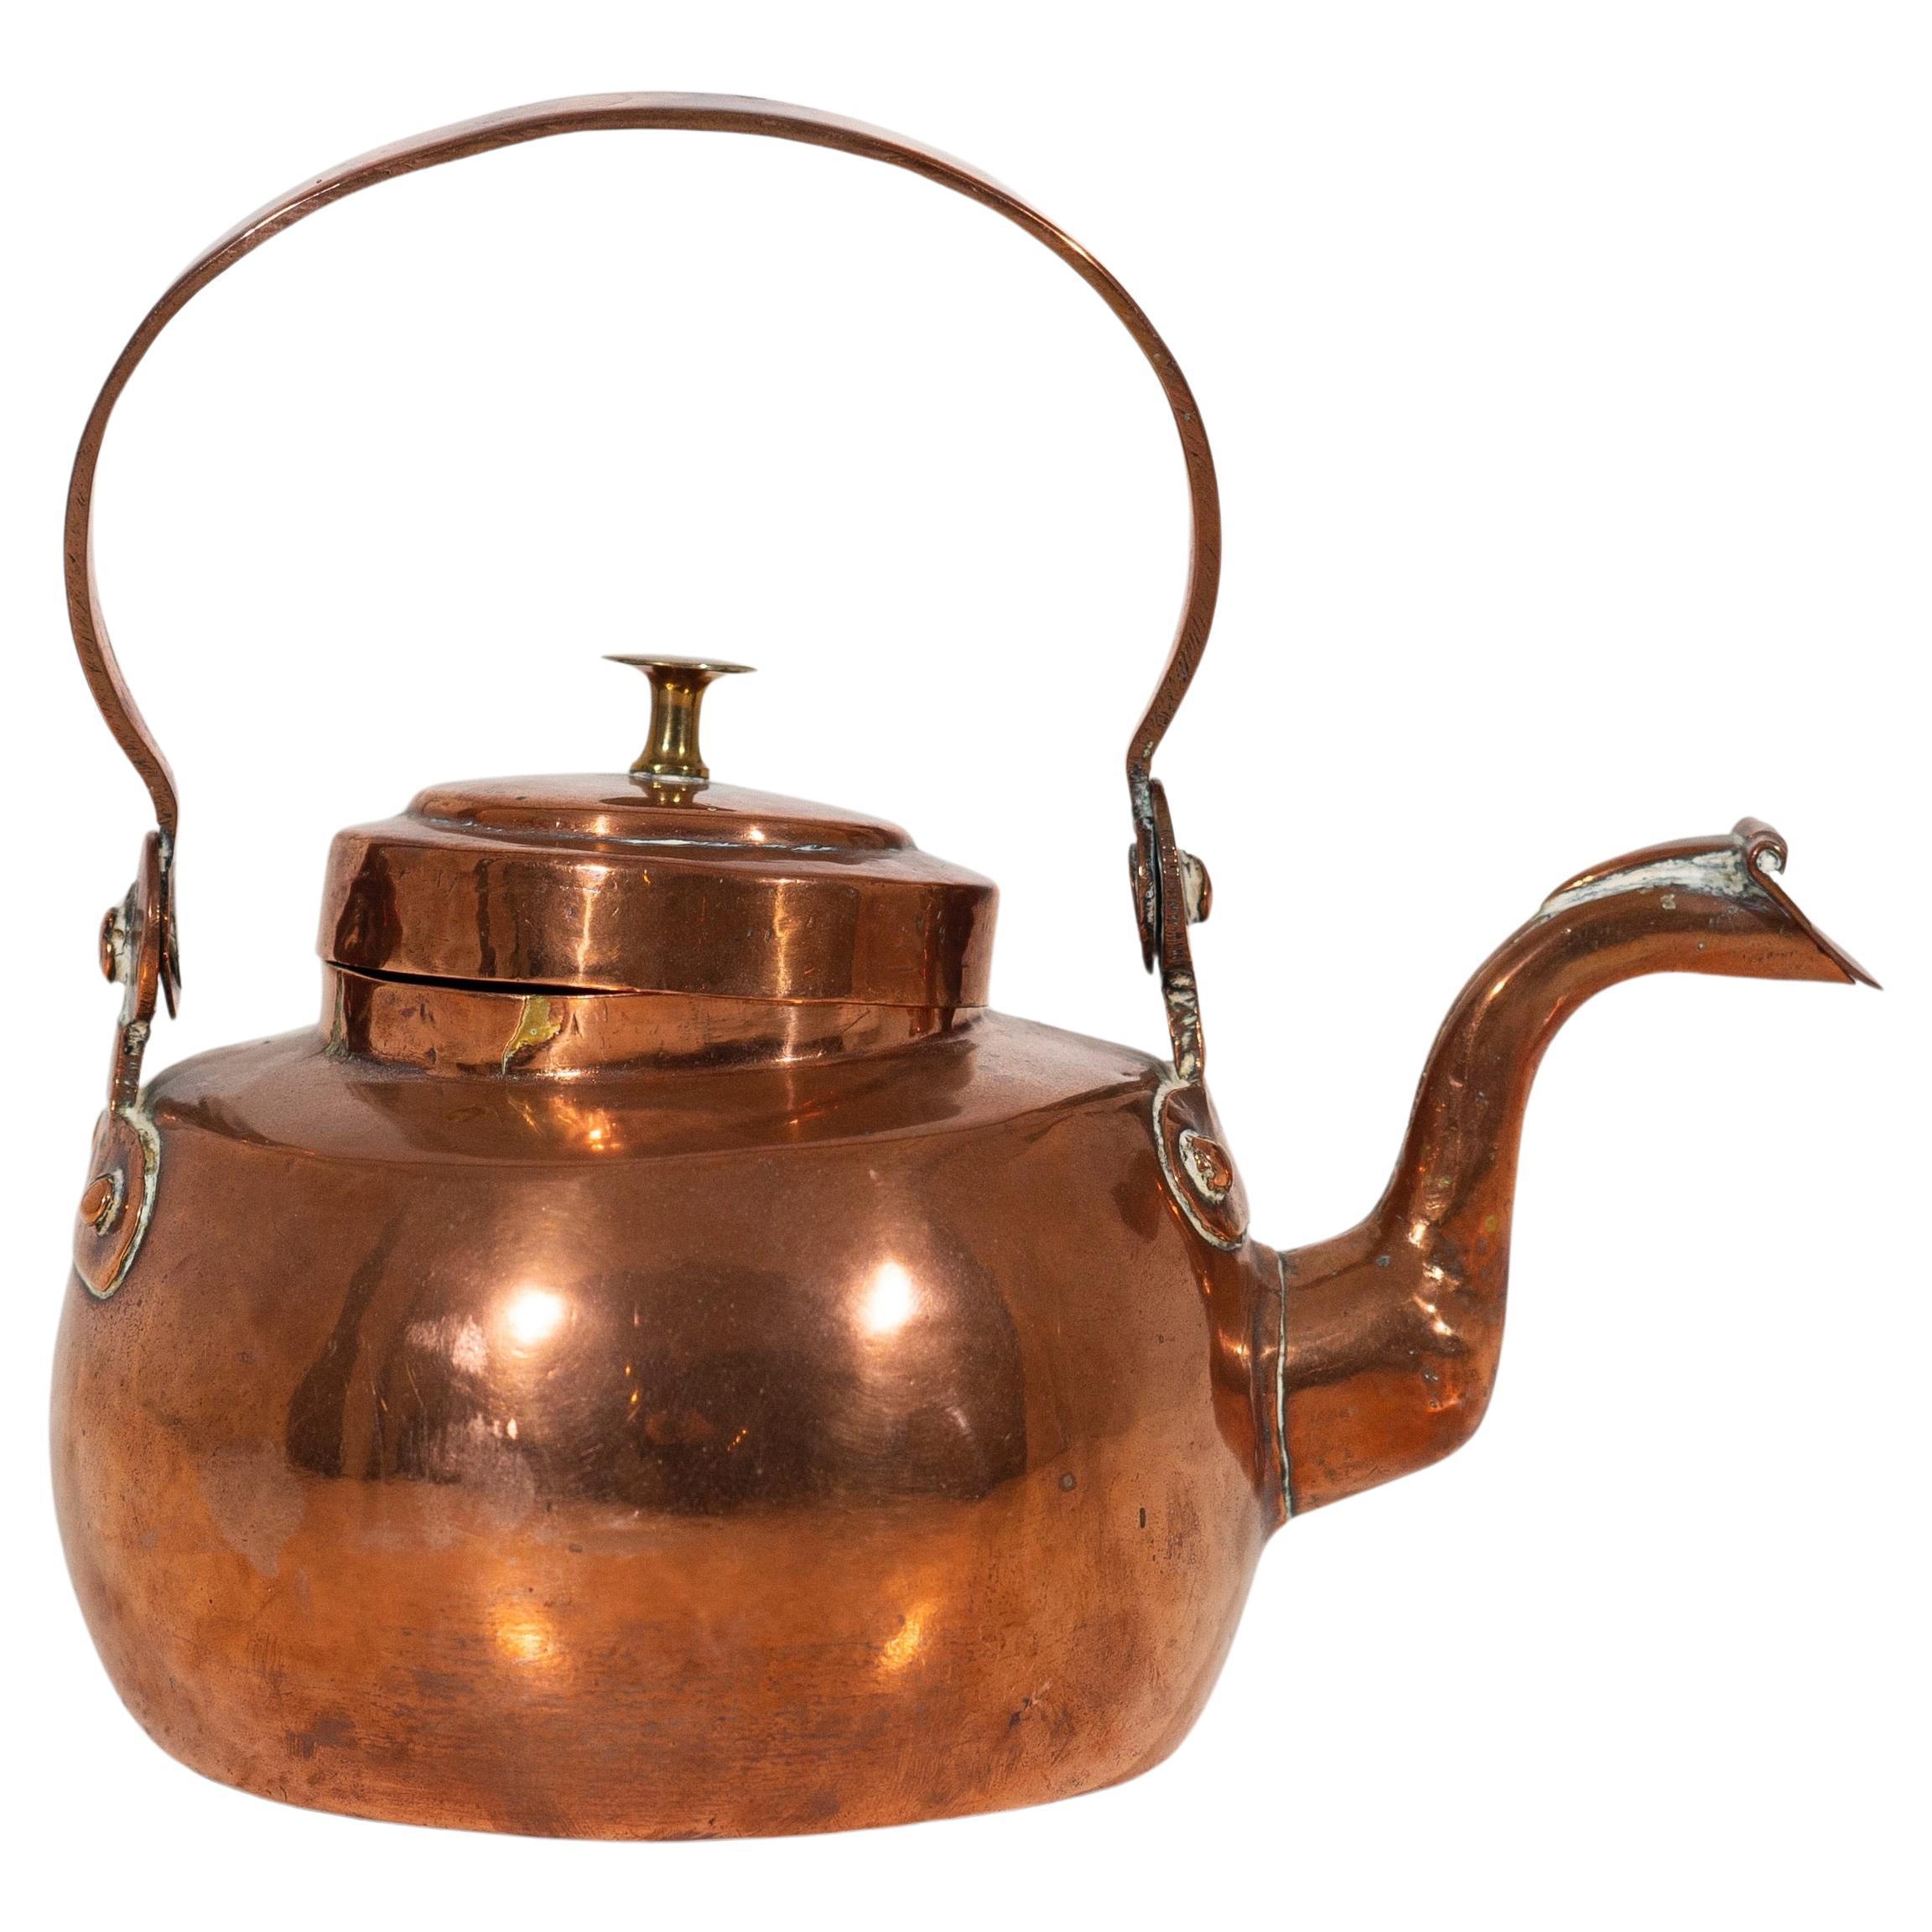 Charming copper boiler, signed, circa 1750. For Sale